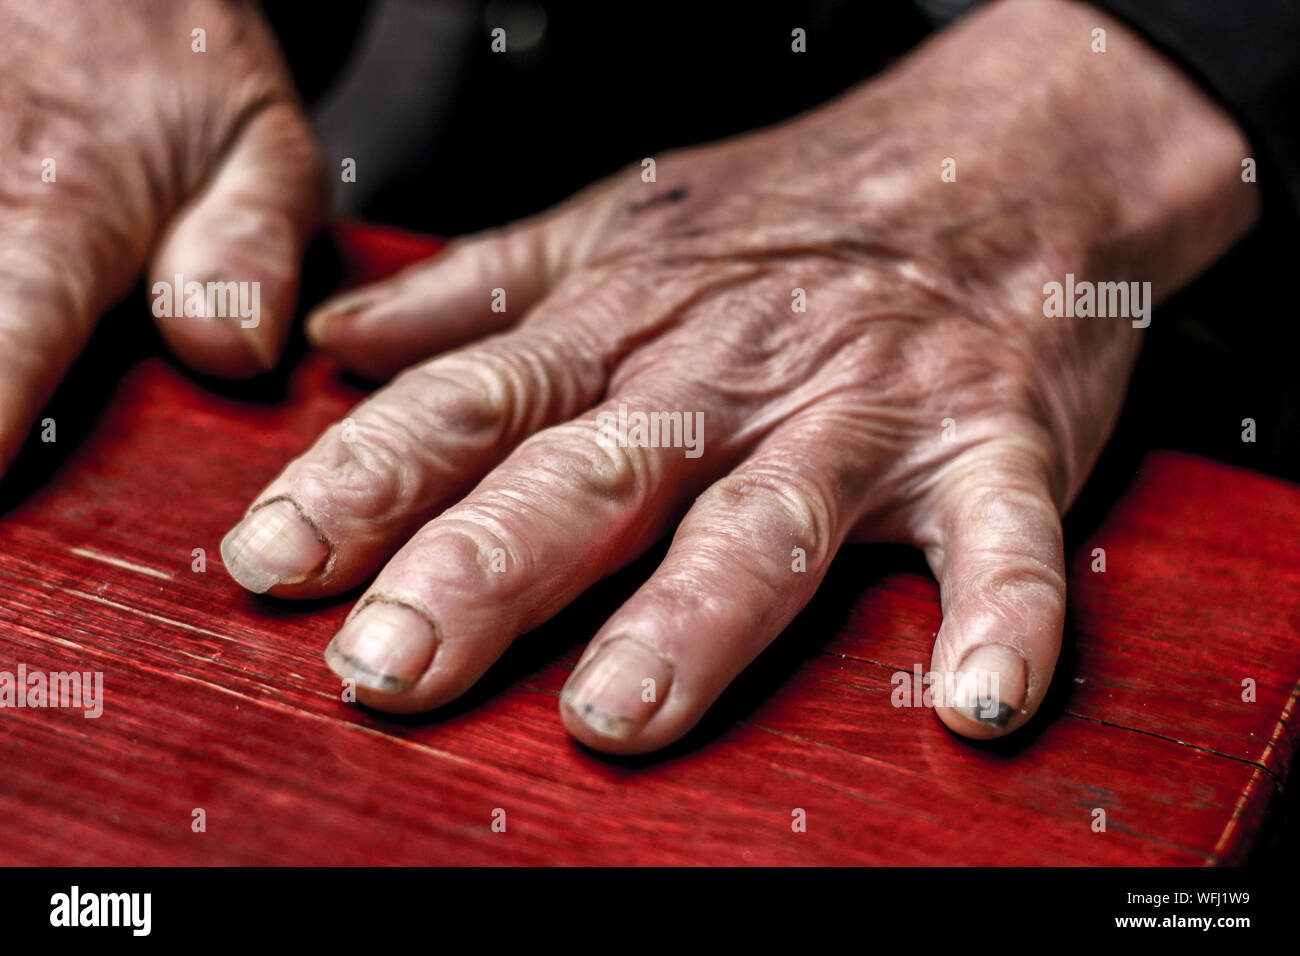 Cropped Hands Of Senior Adult On Table Stock Photo